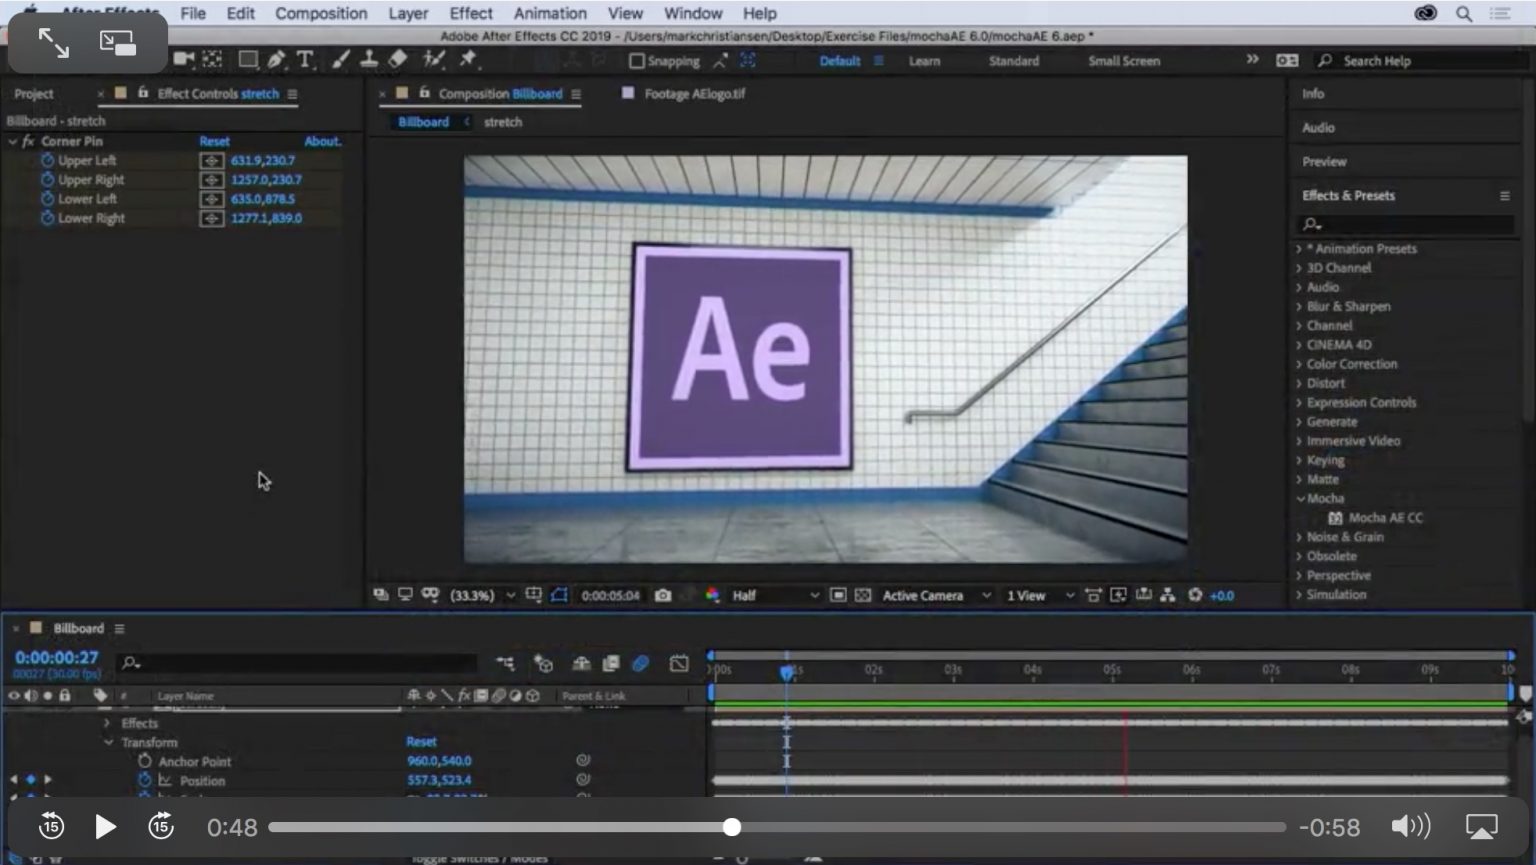 after effects 5.5 free download windows 7